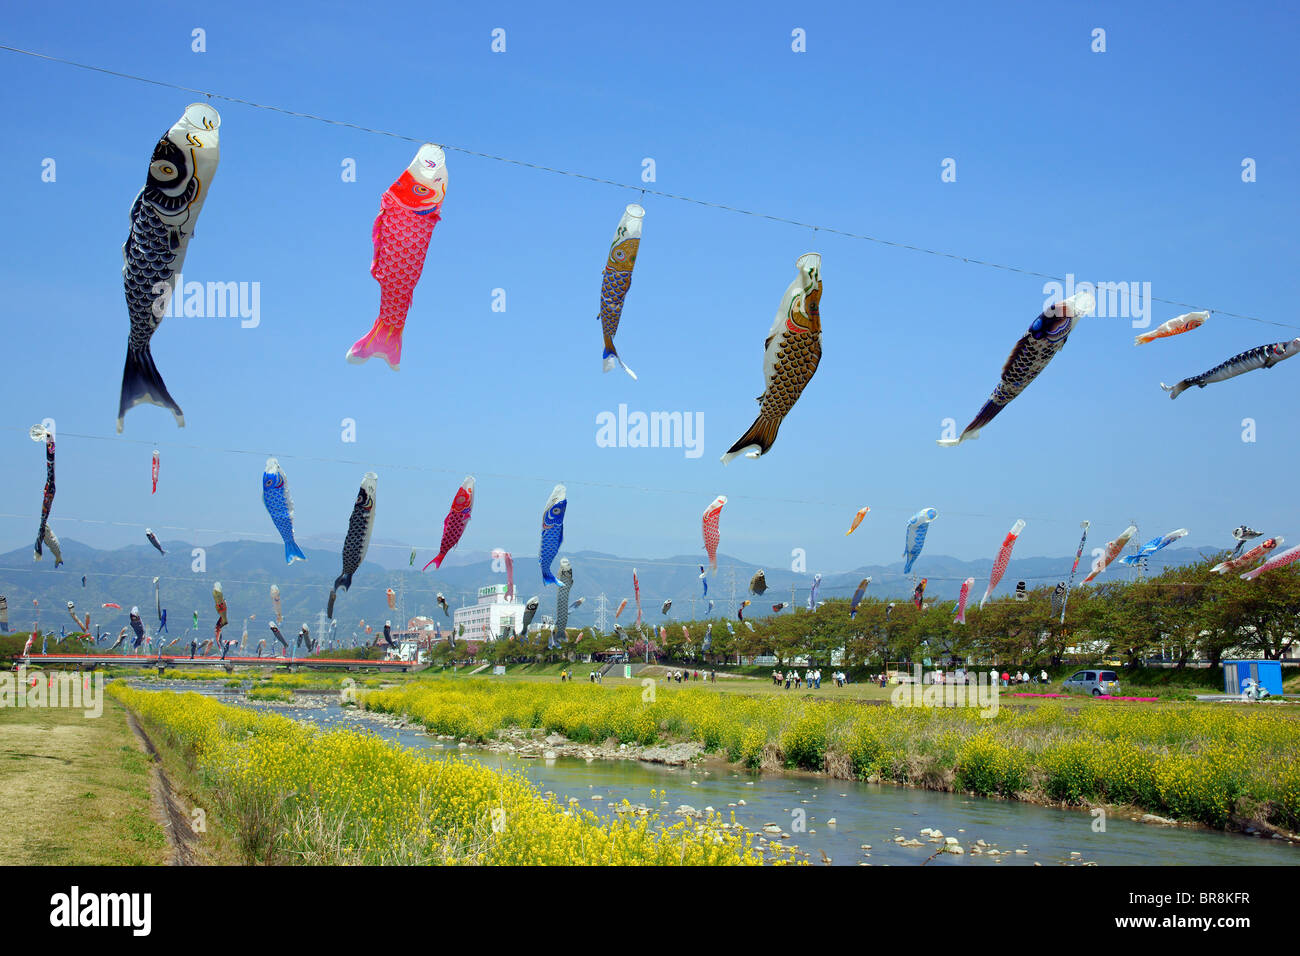 Carp streamers blowing in wind Stock Photo